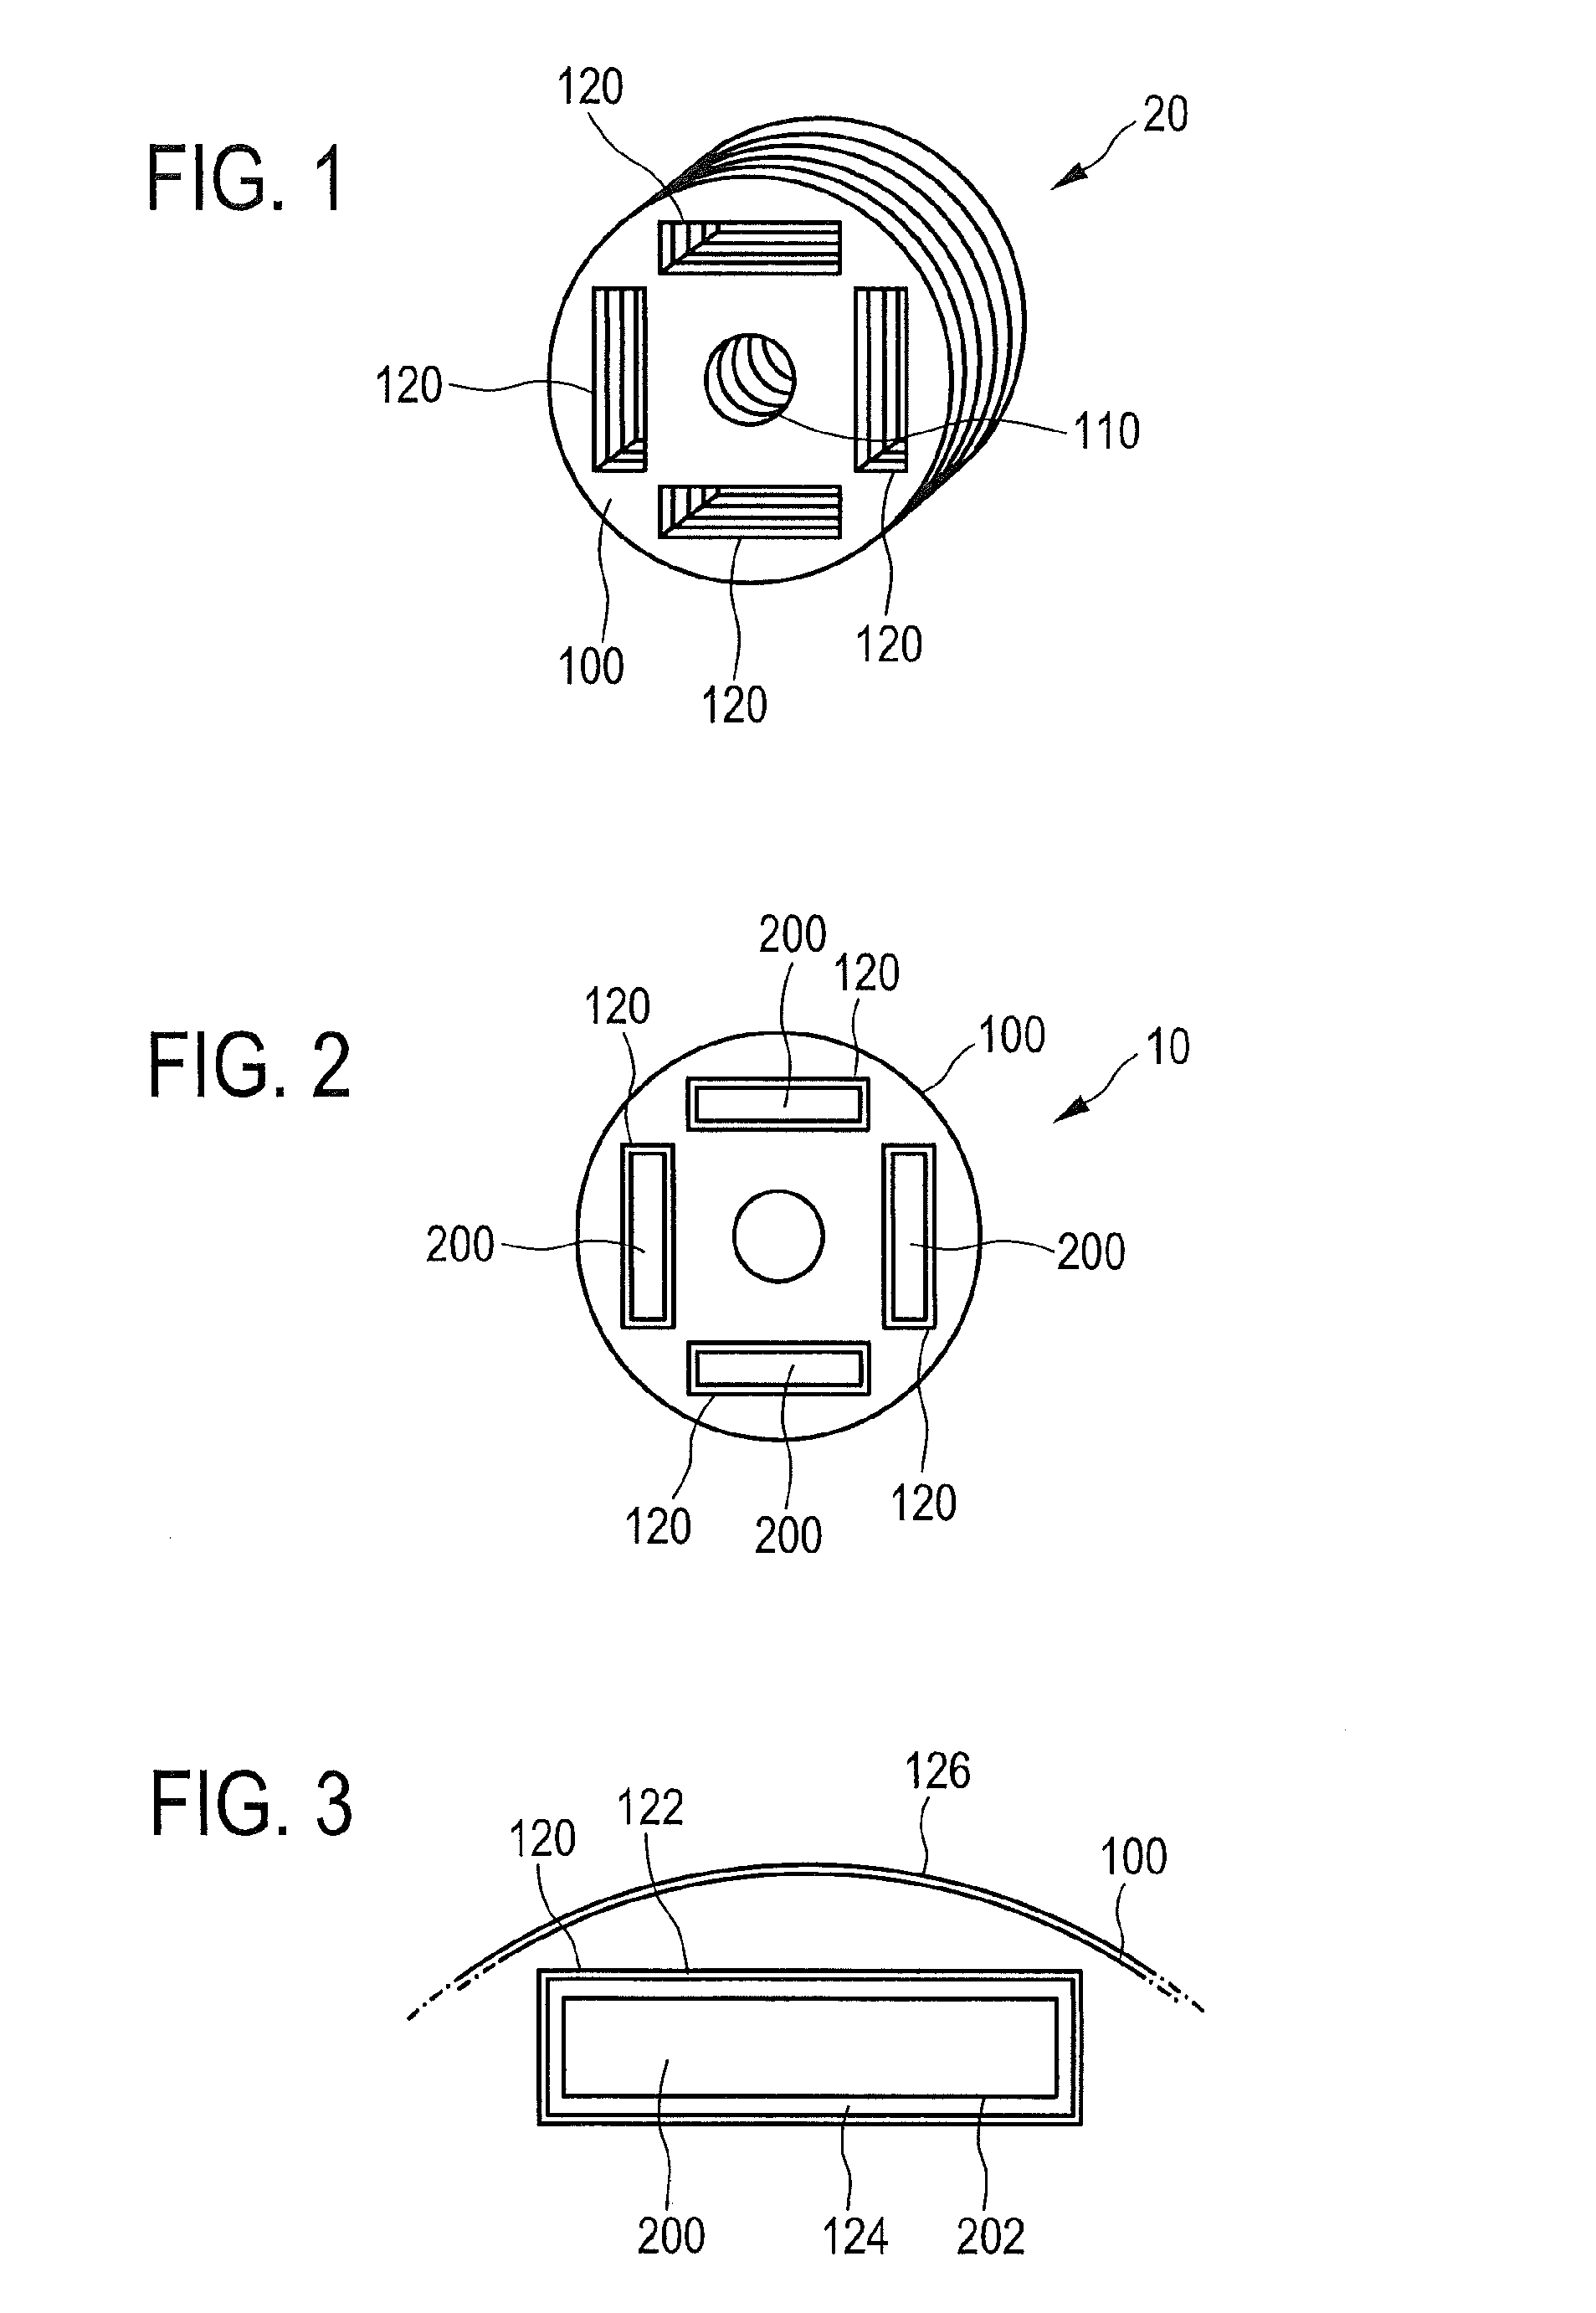 Internally exicted synchronous motor comprising a permanent magnet rotor with multiple corrosion protection